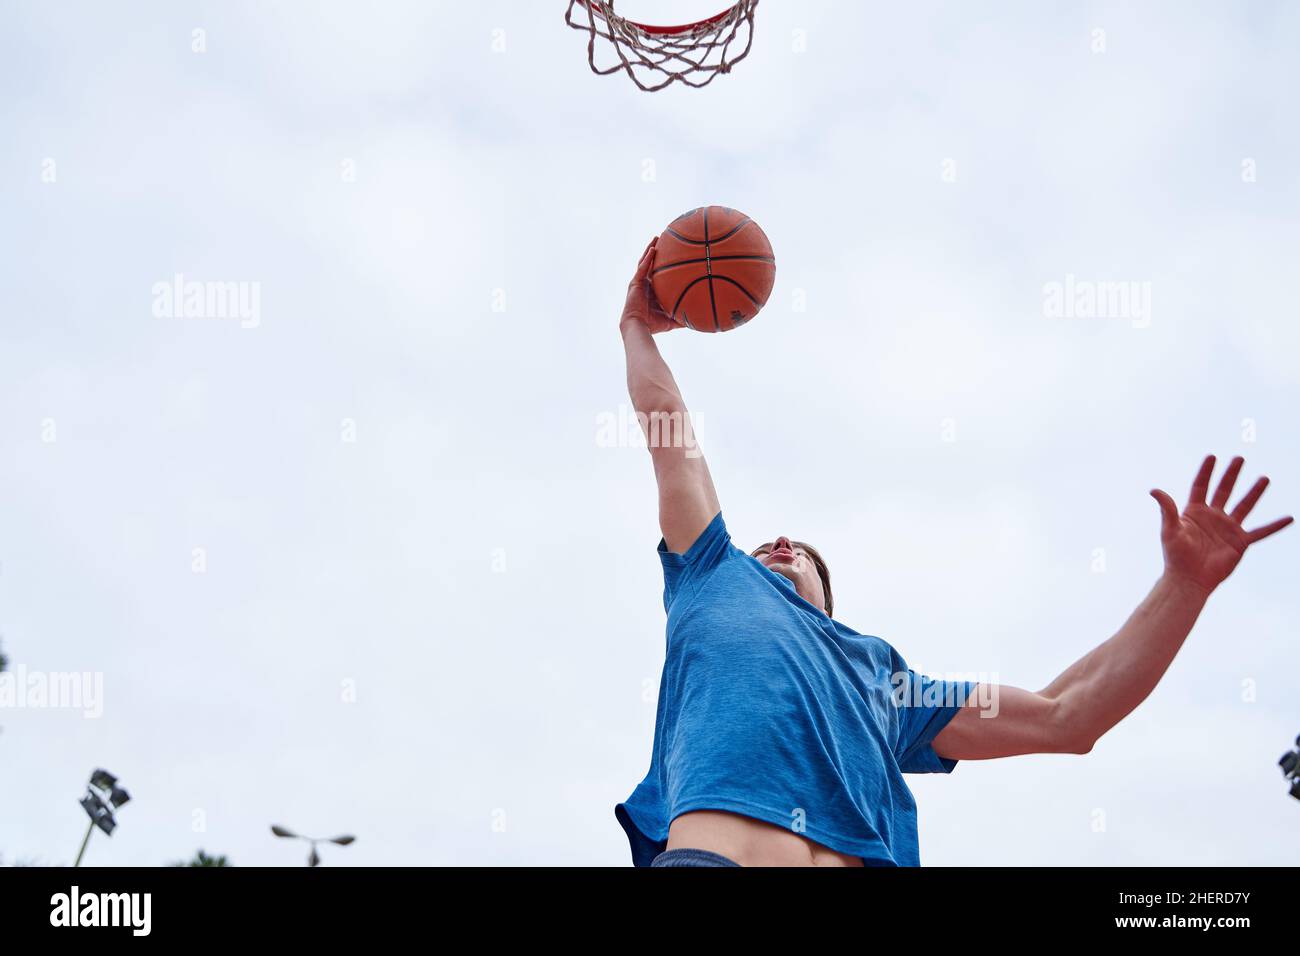 young Caucasian man dunking on an outdoor basketball court. concept of sport Stock Photo